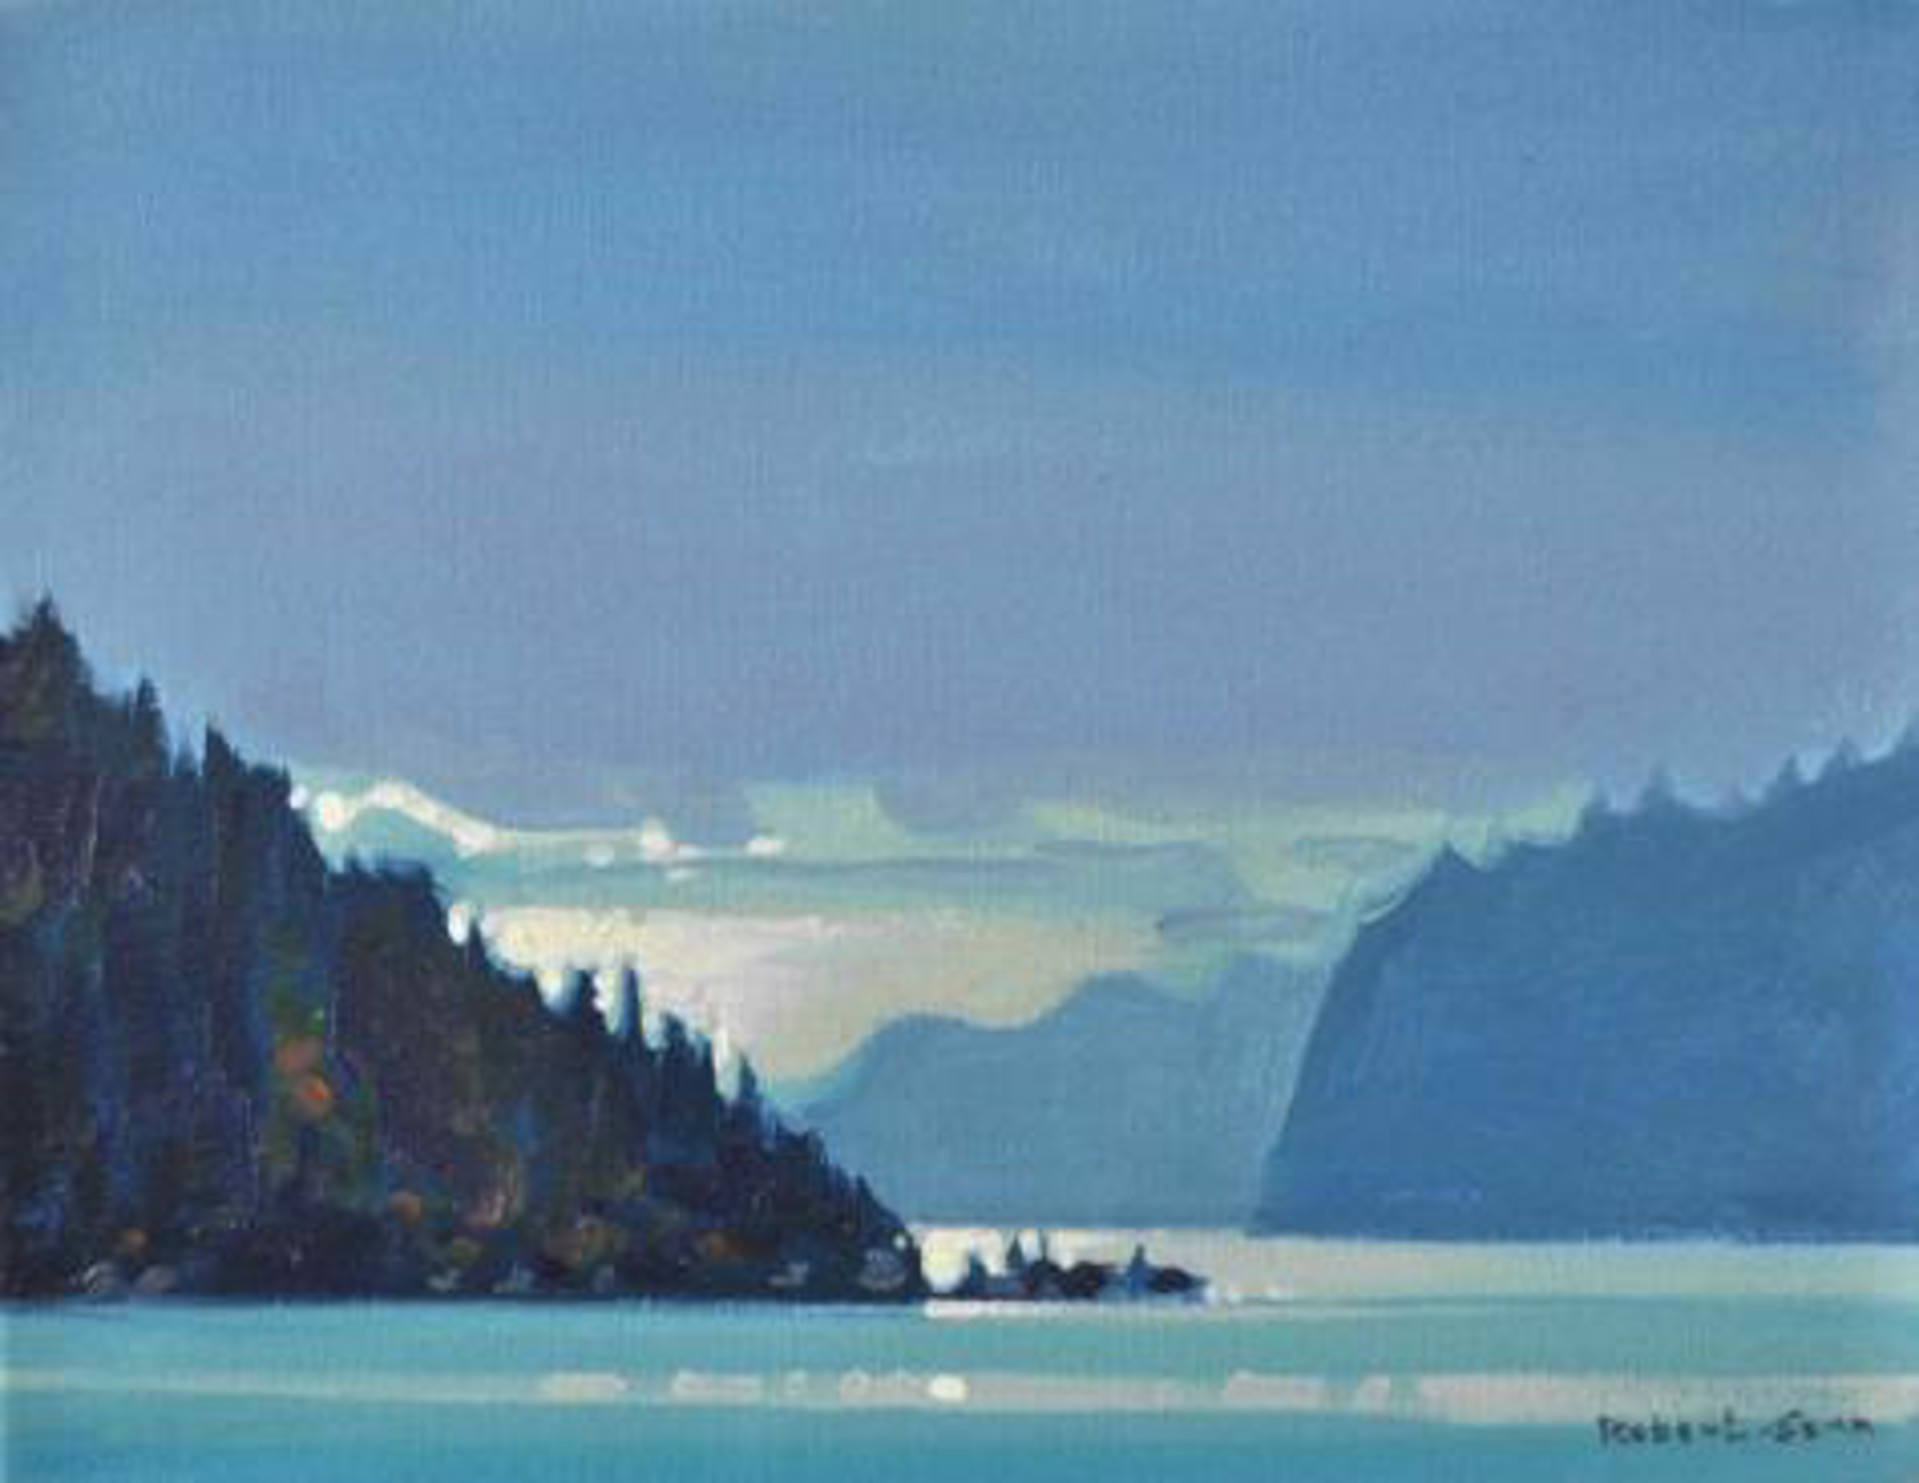 Morning on the Octopus Islands by Robert Genn (1936-2014)